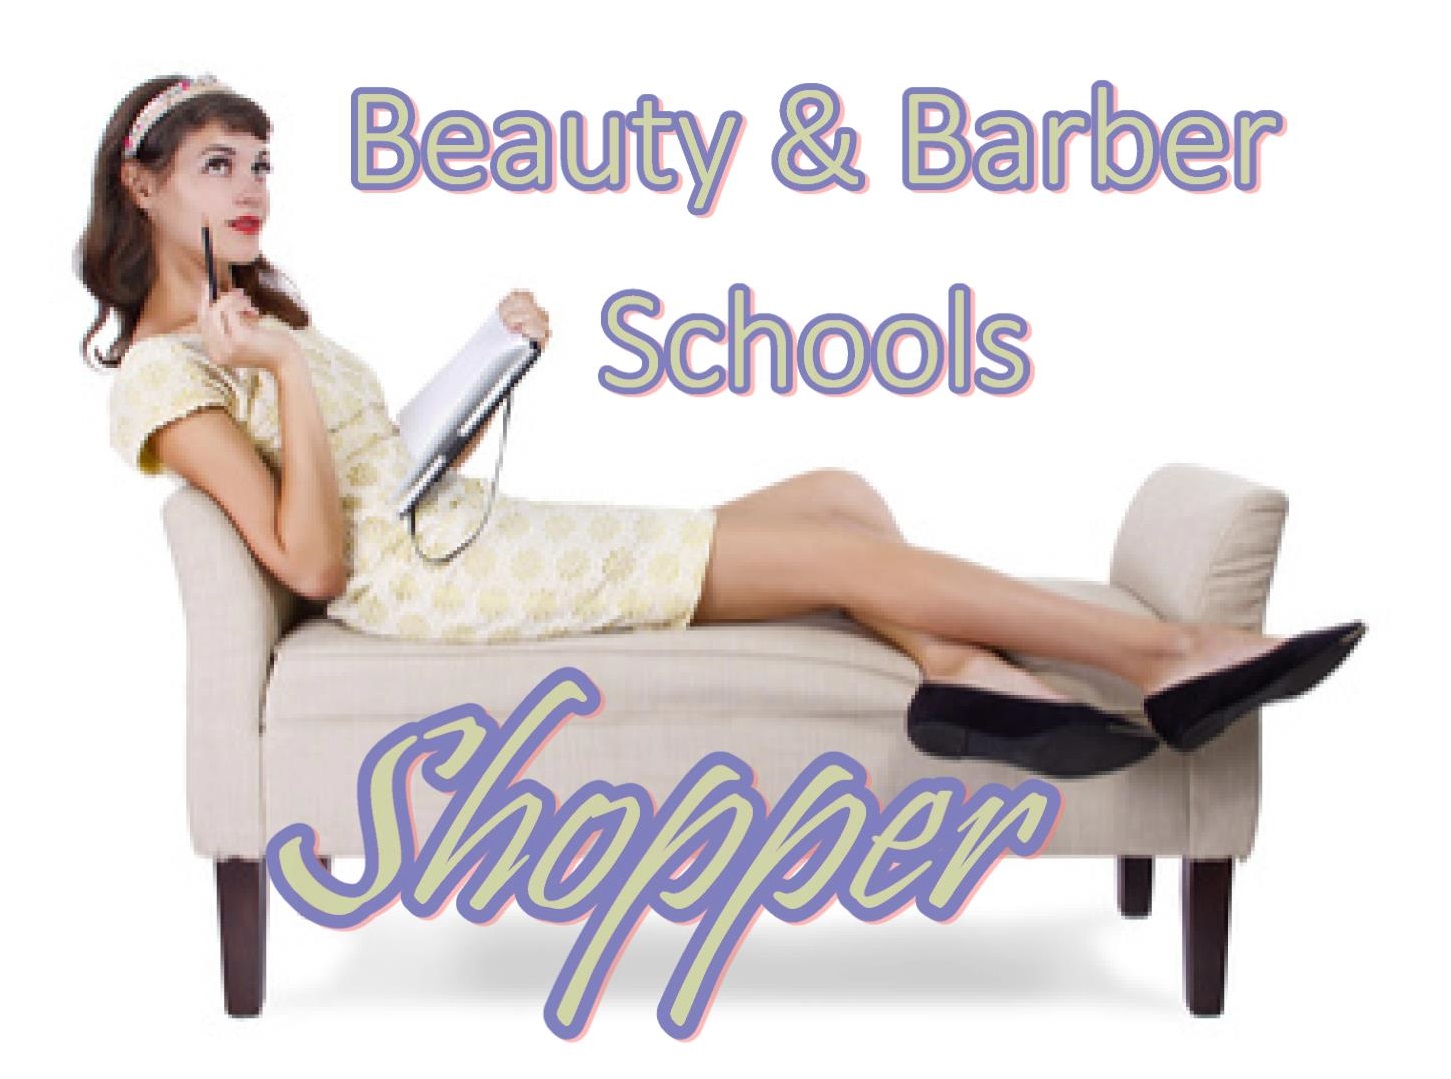 Find a beauty or barber school in New Hampshire PLUS practice for the state board exam for free